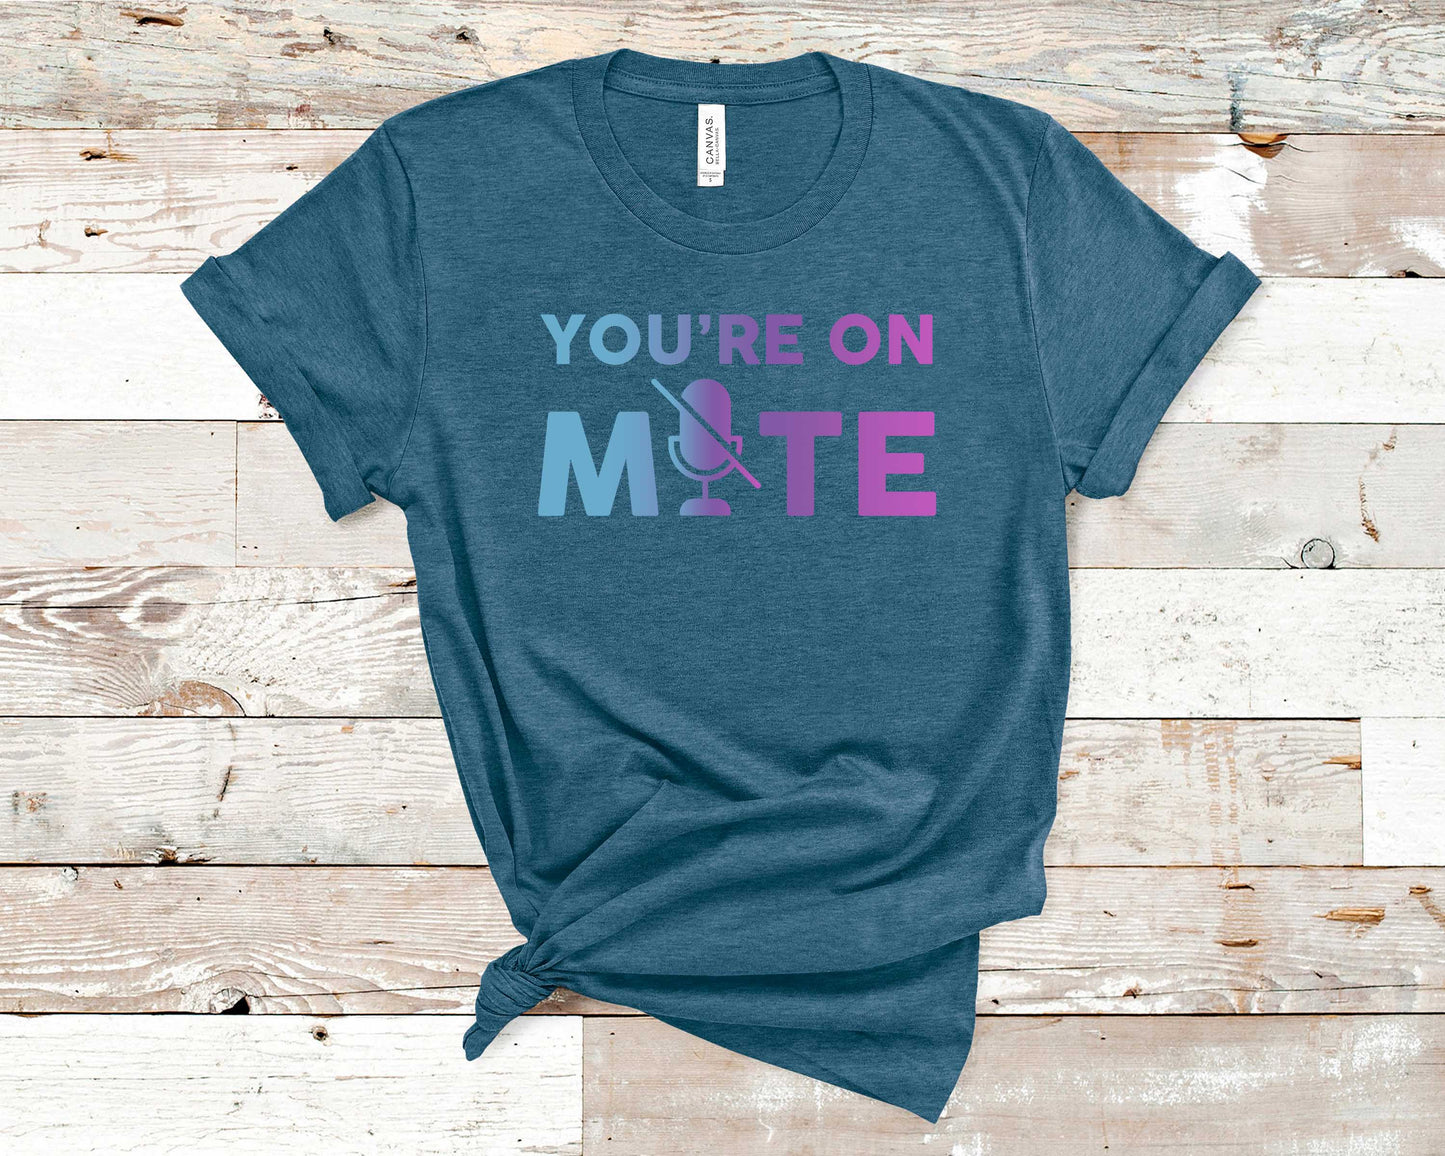 You're On Mute - Funny/ Sarcastic